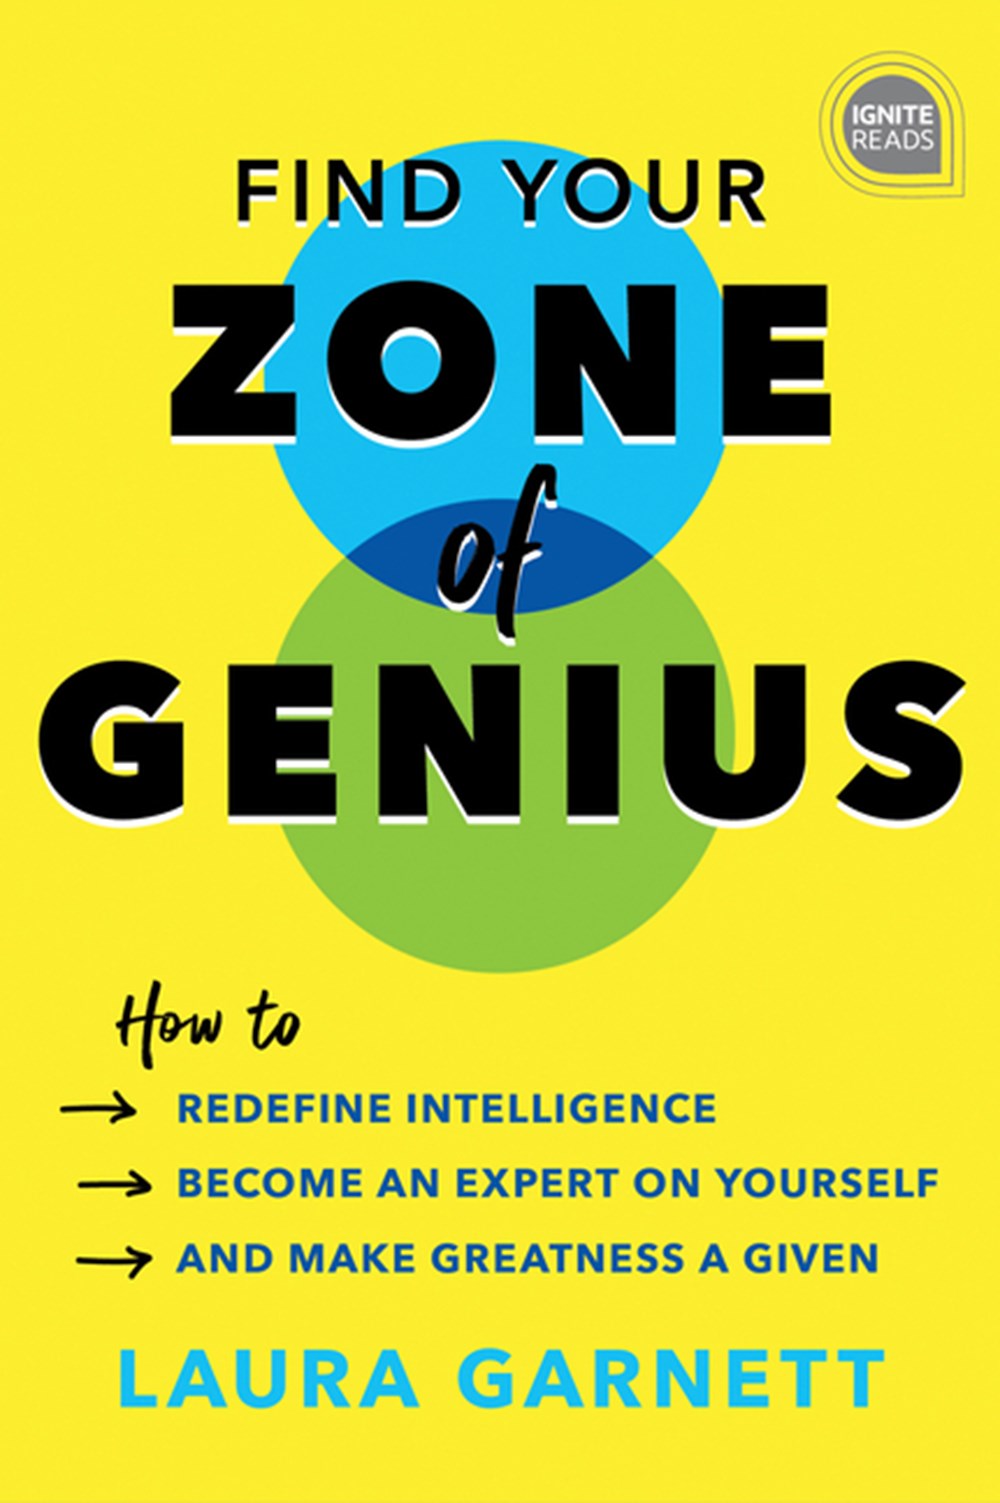 Find Your Zone of Genius How to Redefine Intelligence, Become an Expert on Yourself, and Make Greatn